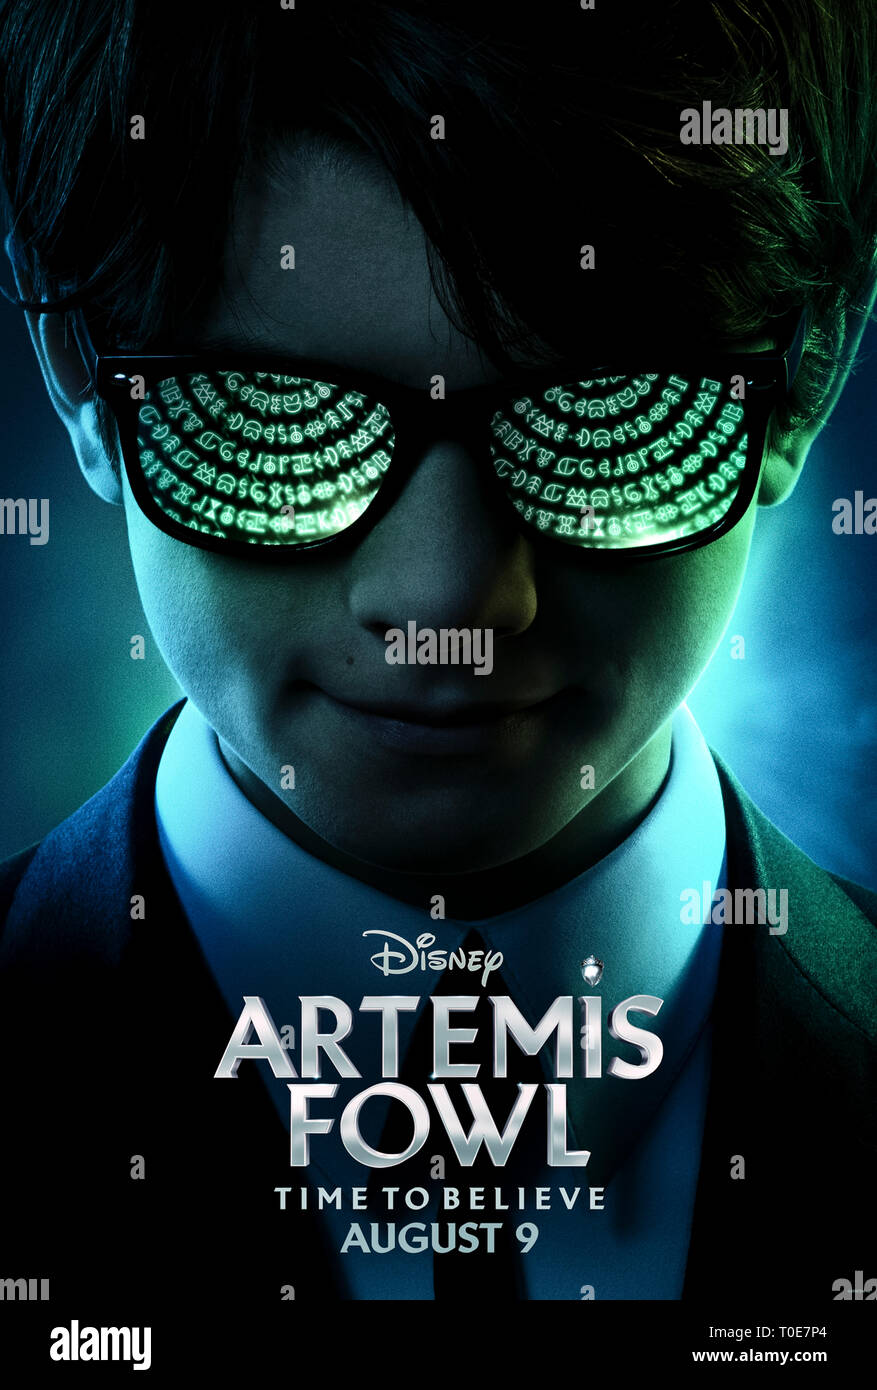 Artemis Fowl (2019) directed by Kenneth Branagh and starring Judi Dench, Josh Gad and Miranda Raison. Big screen adaptation of Eoin Colfer’s Artemis Fowl science fiction fantasy novels. Stock Photo